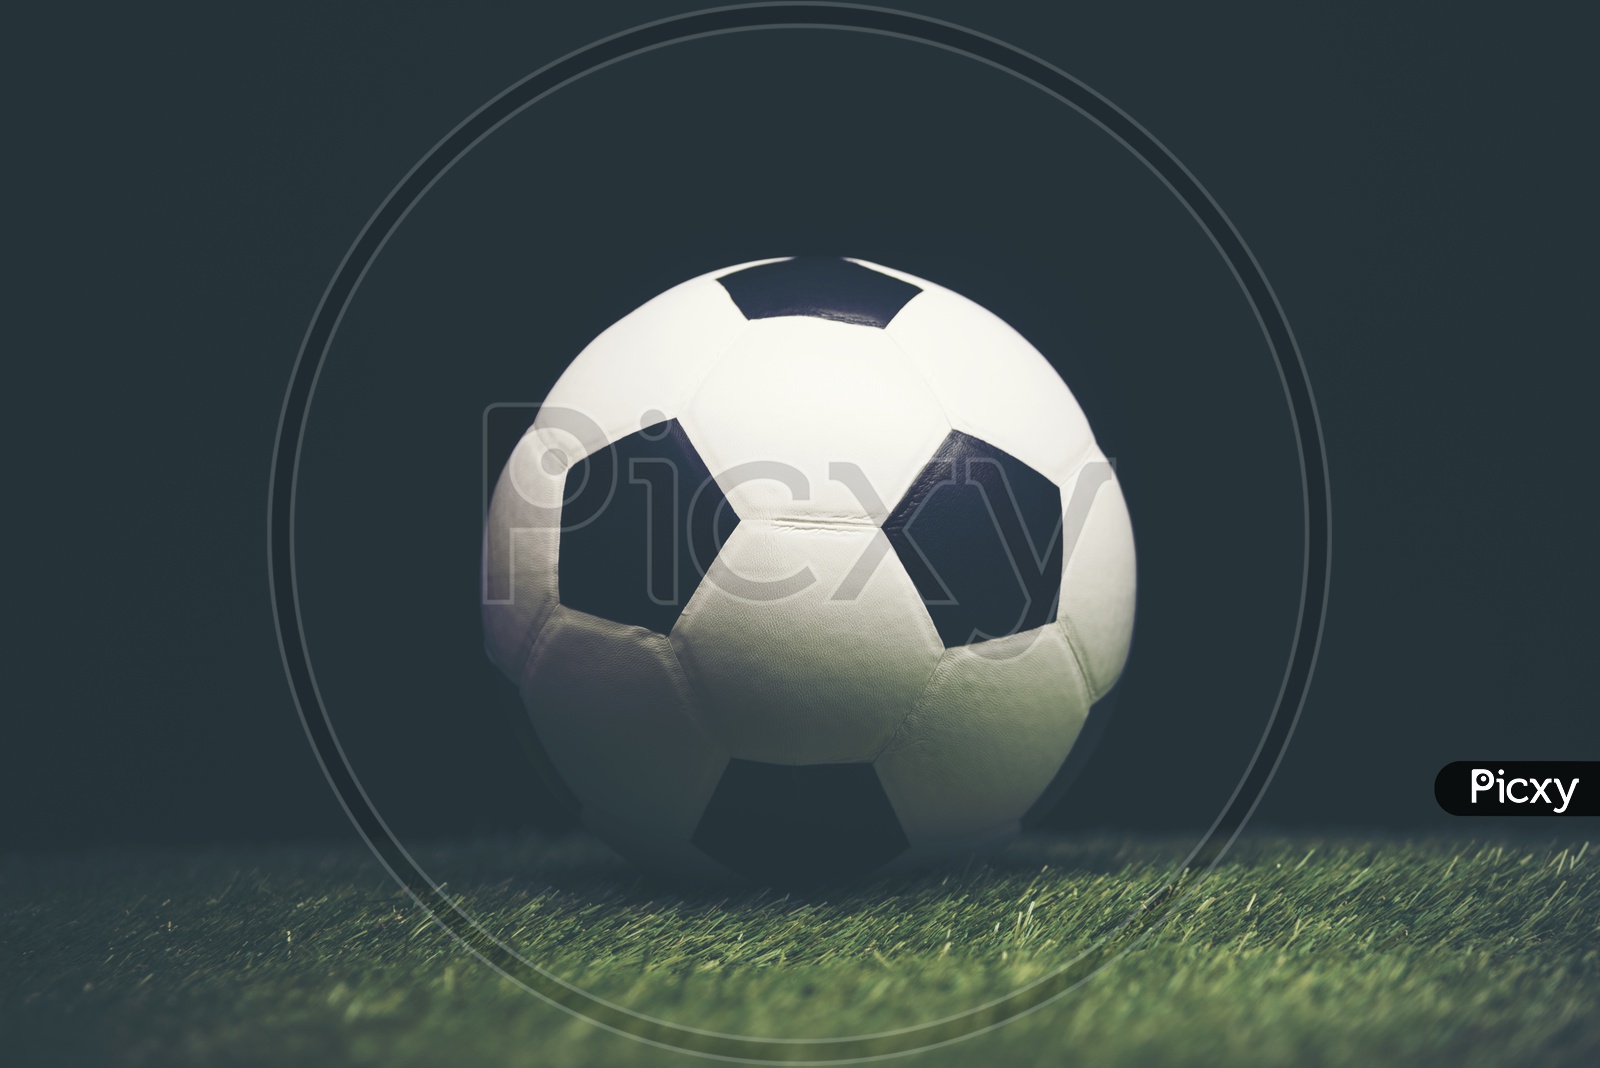 Soccer ball on grass with black background